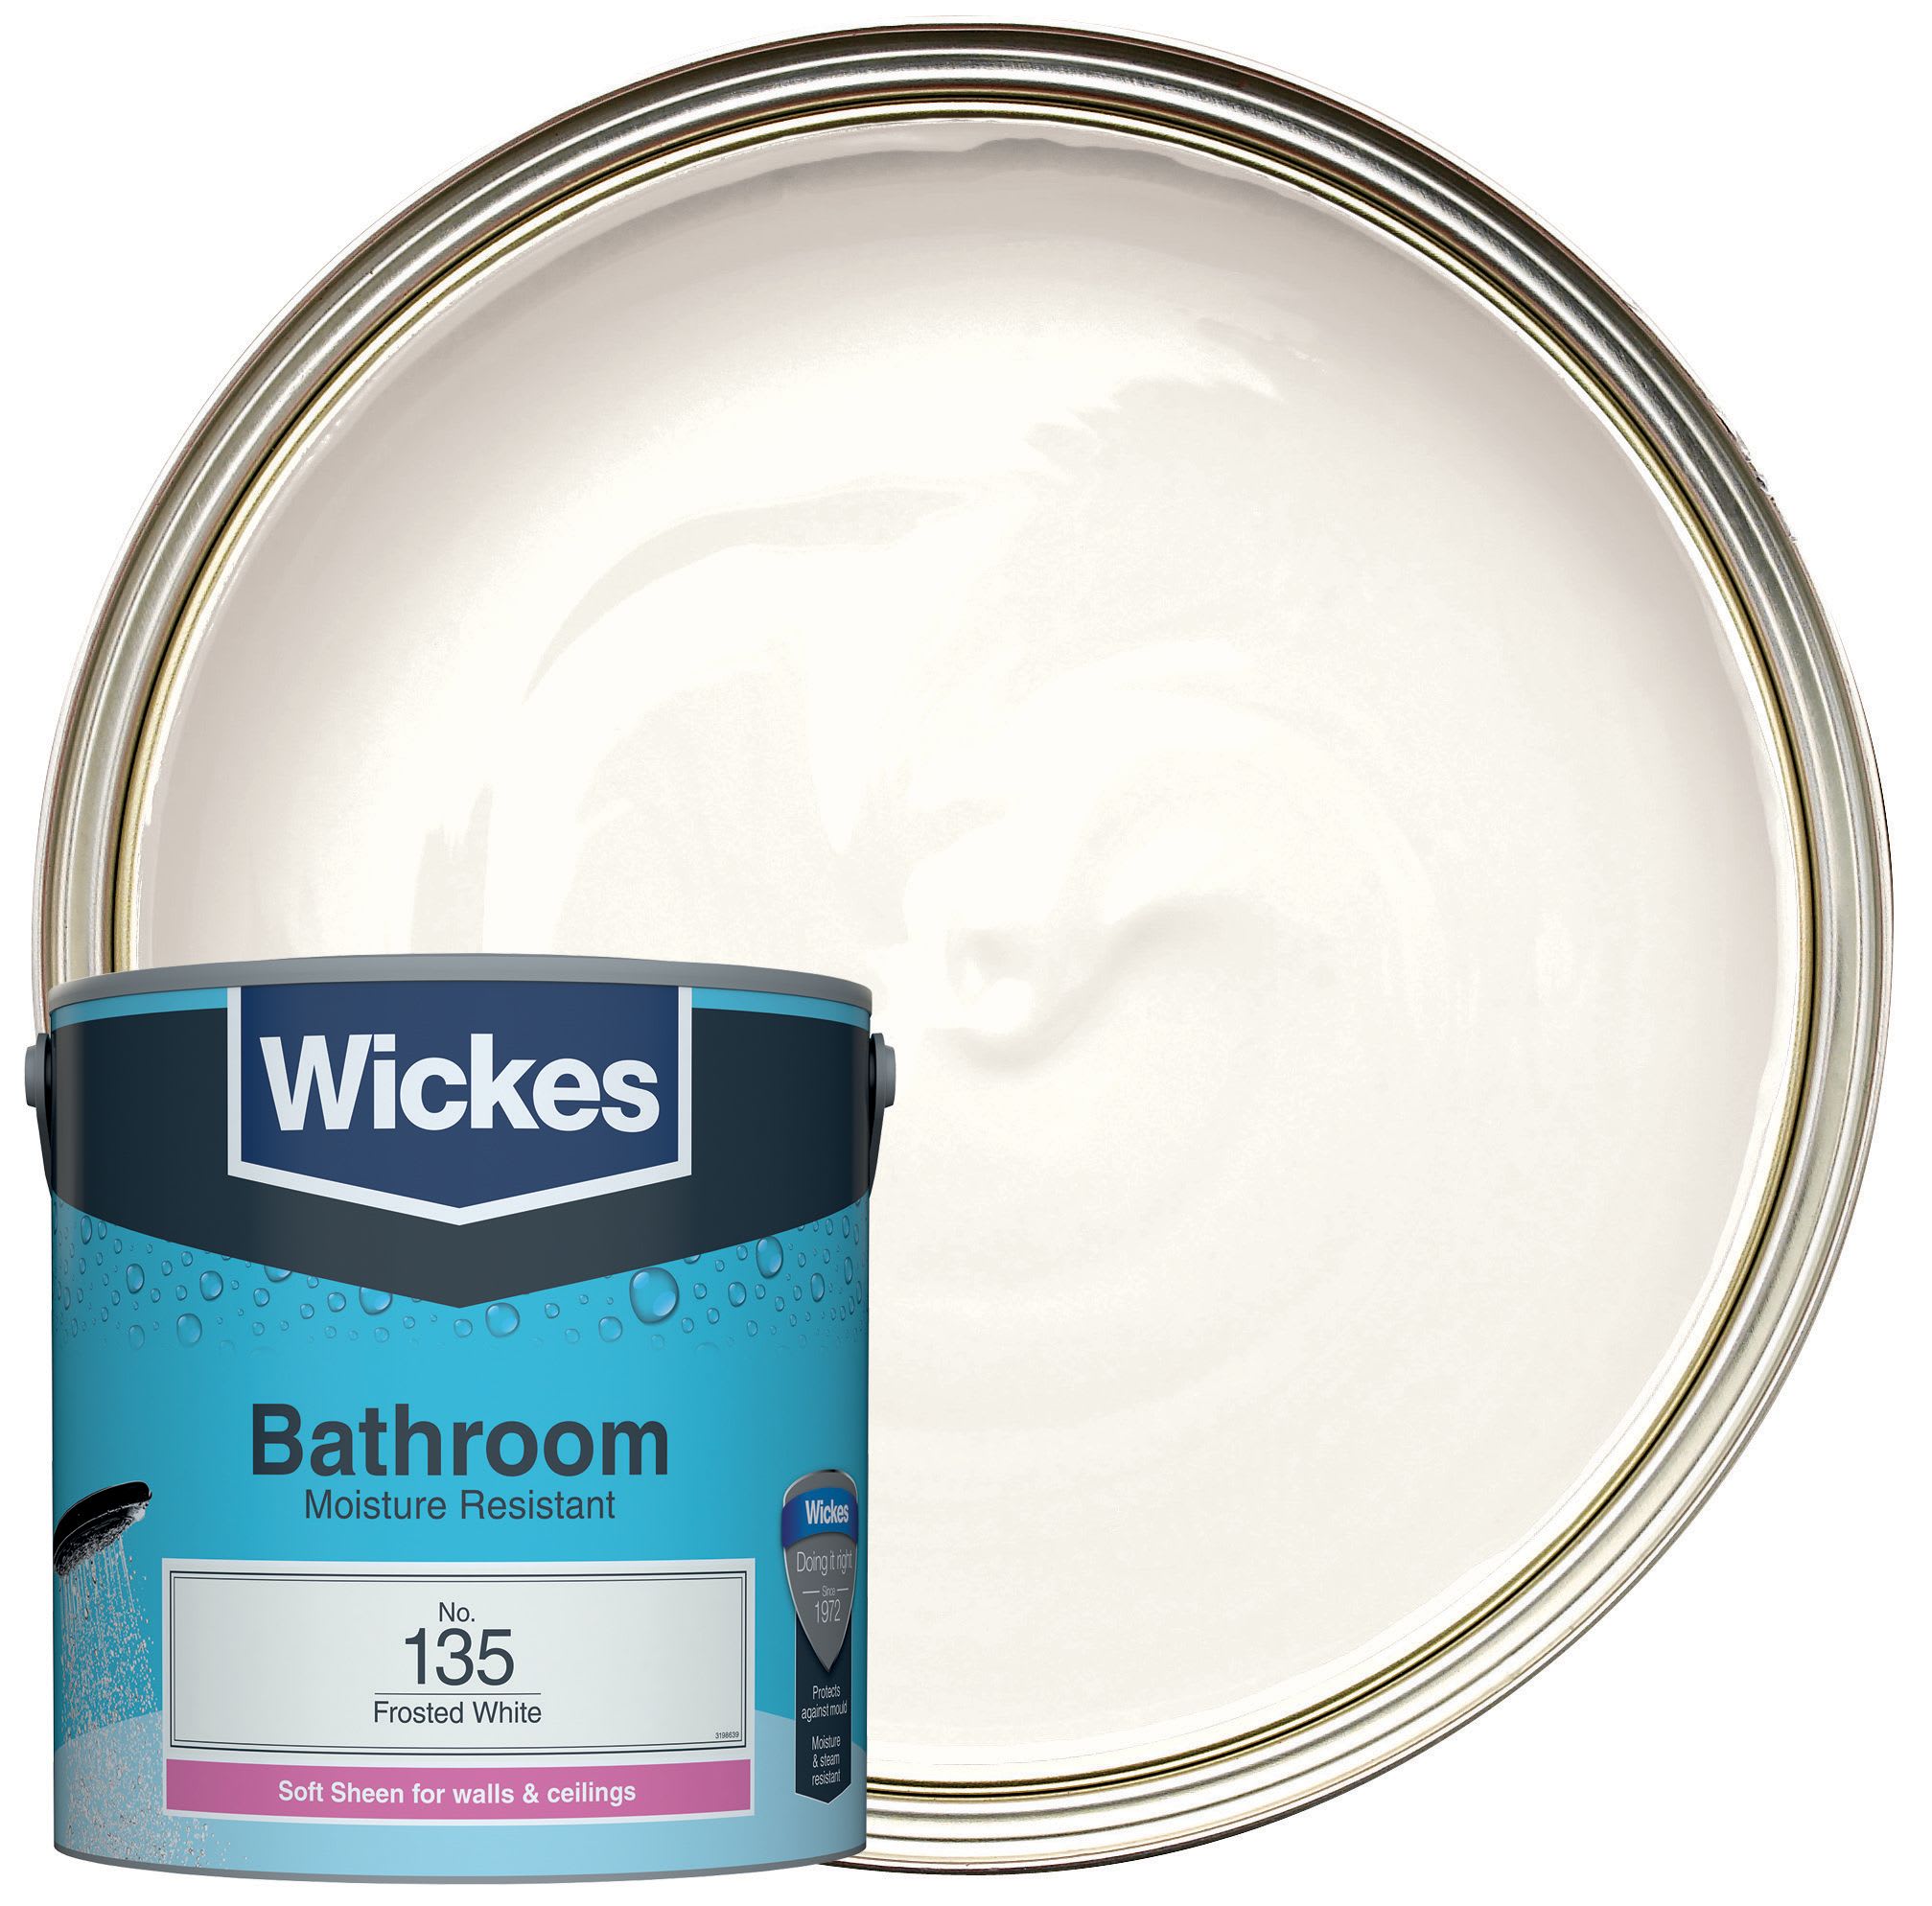 Wickes Bathroom Soft Sheen Emulsion Paint - Frosted